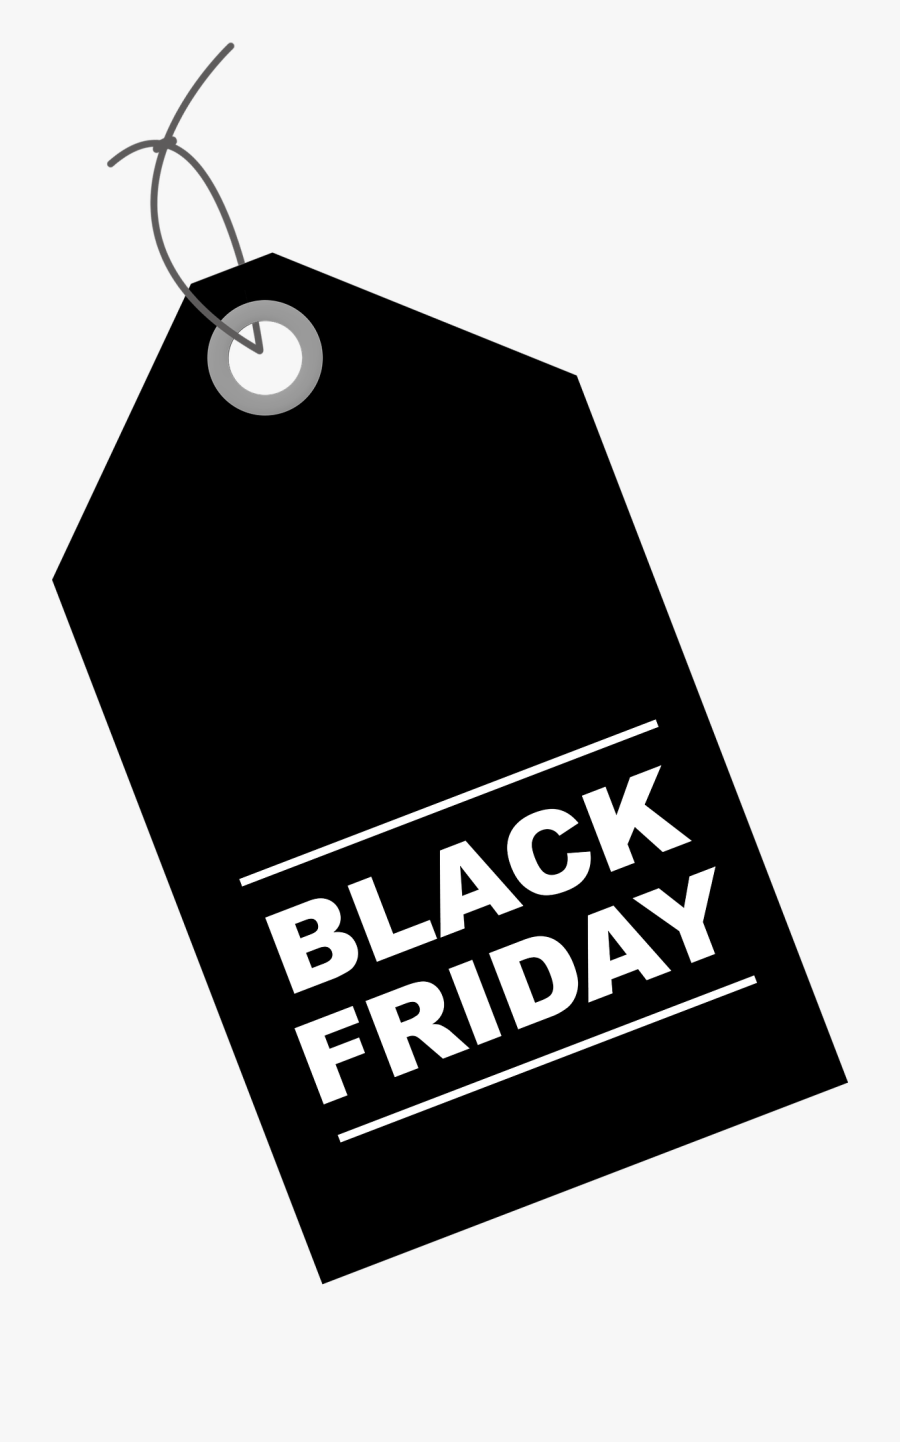 Black Friday Price Tag Png, Transparent Clipart